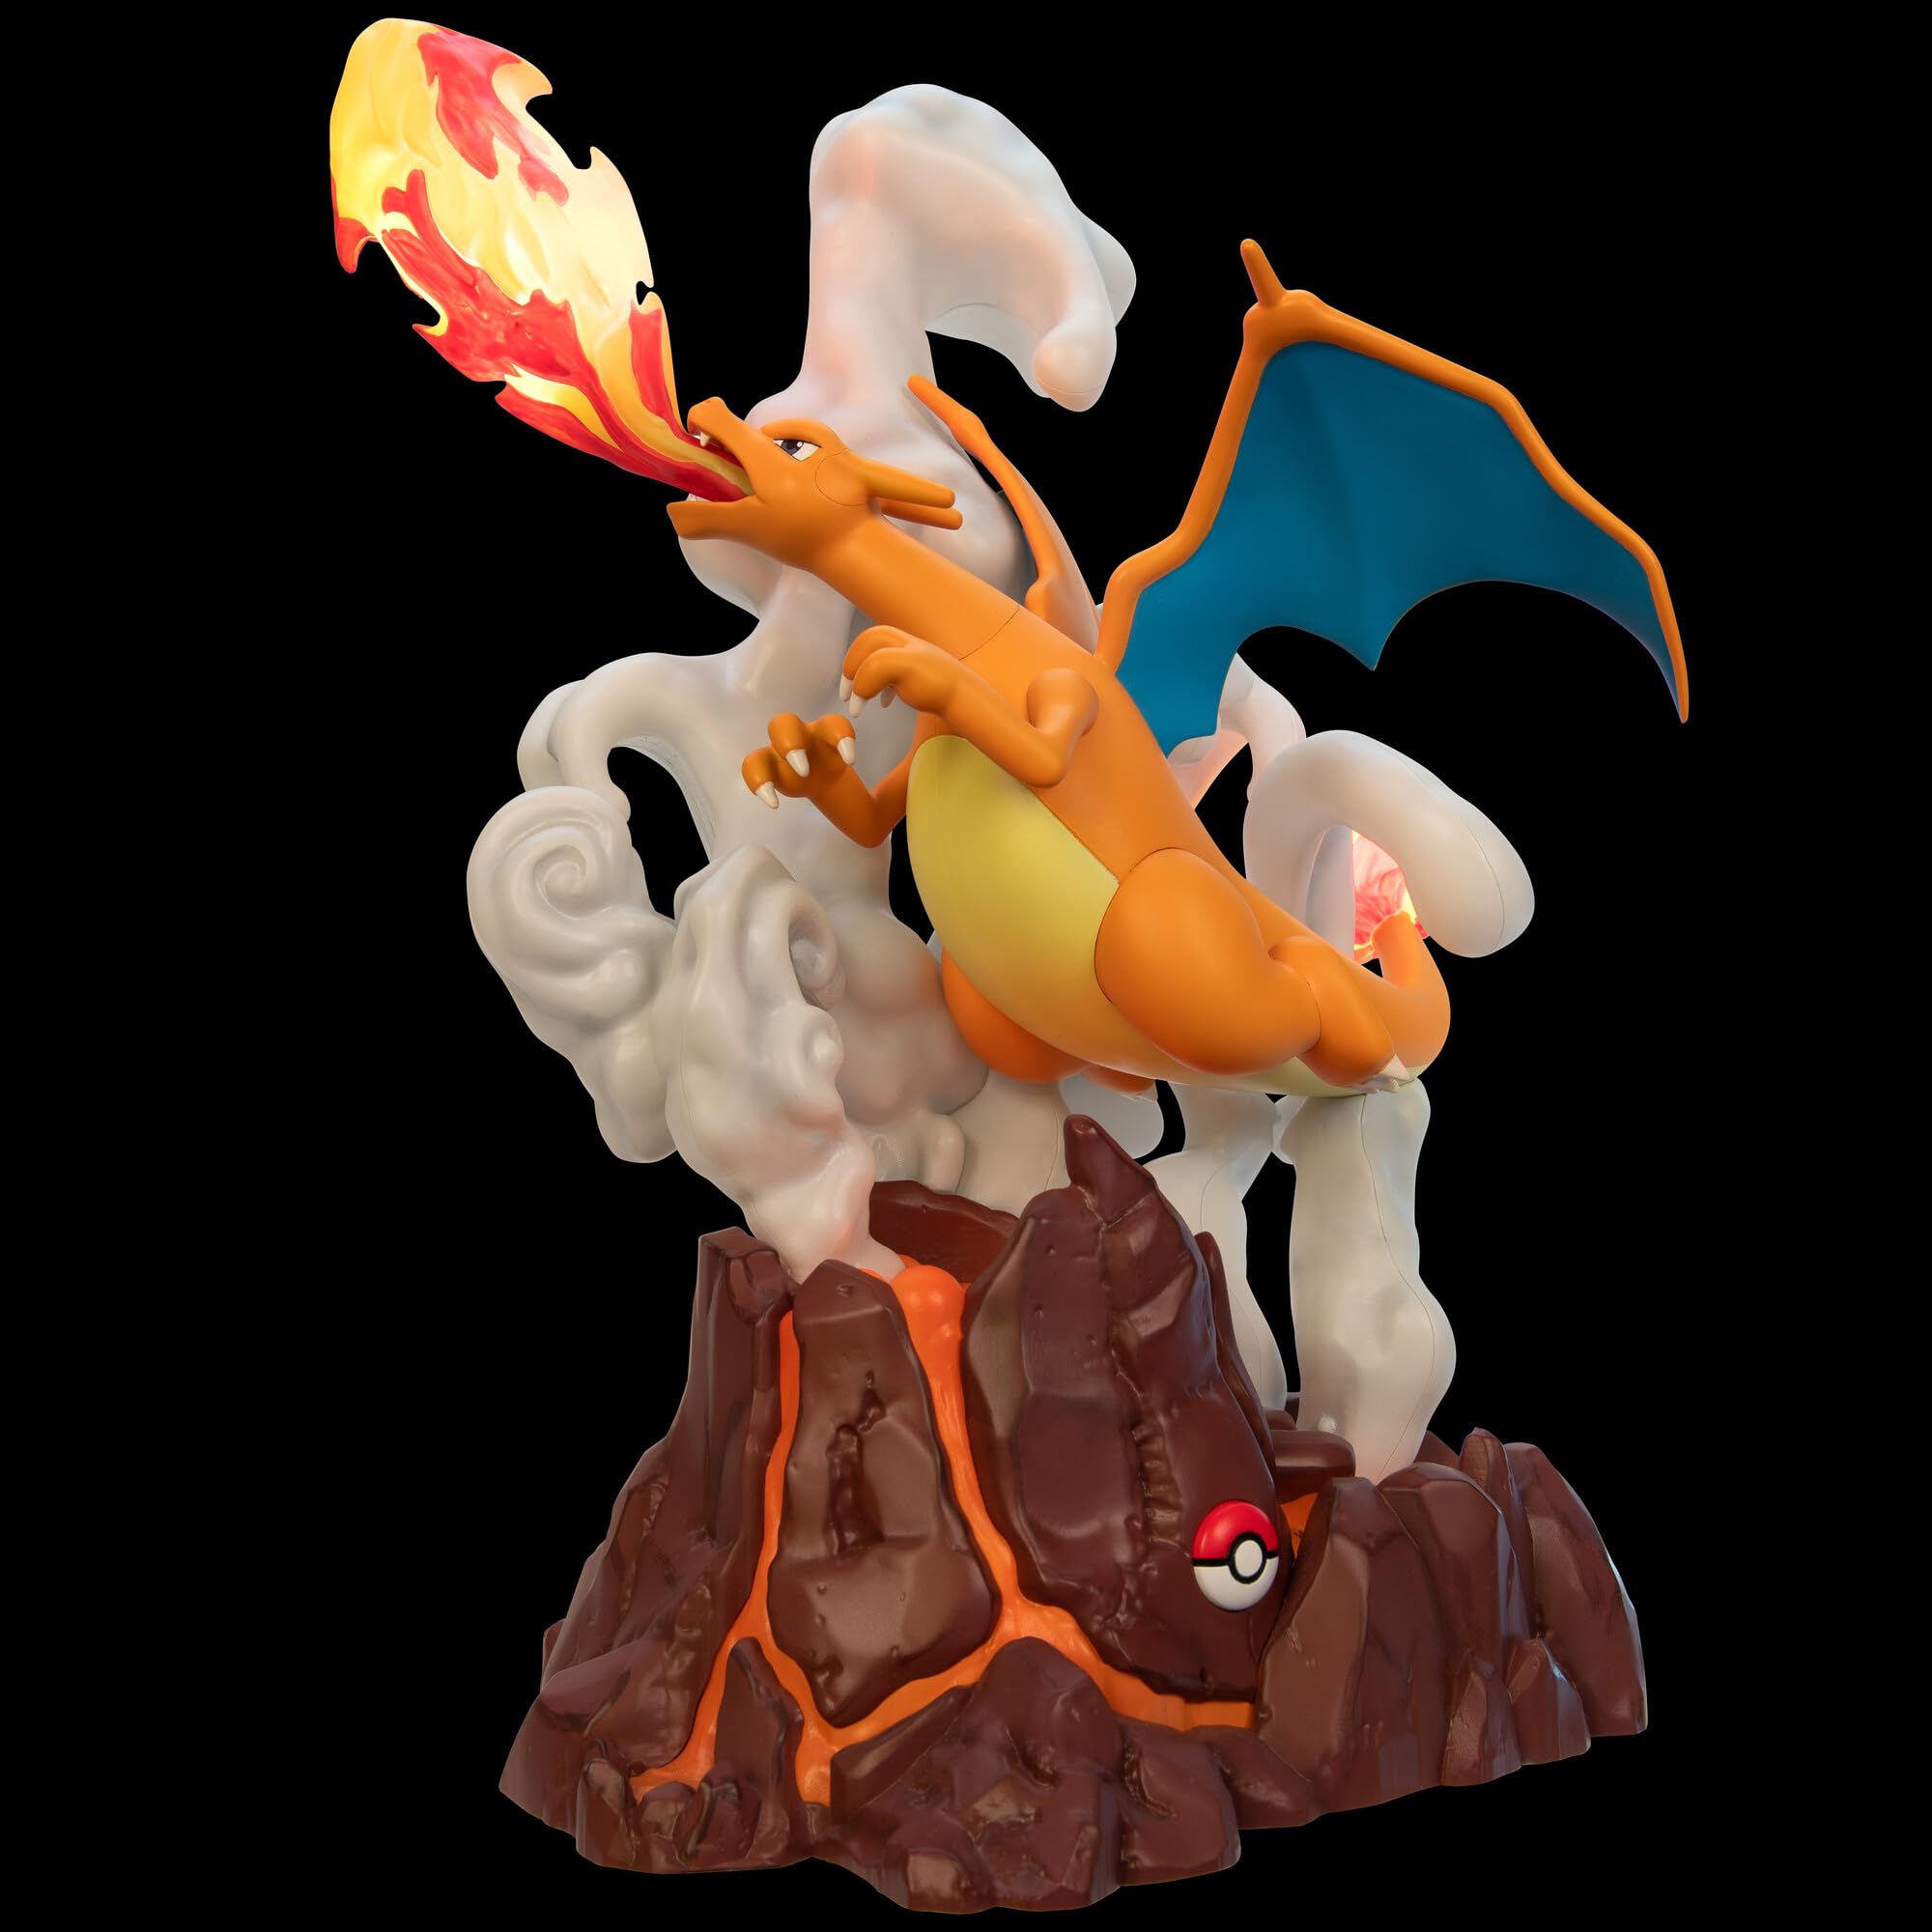 13'' Jazwares Pokémon Select Deluxe Collector’s Light FX Statue (Charizard) $31.01 + Free Shipping w/ Prime or on $35+